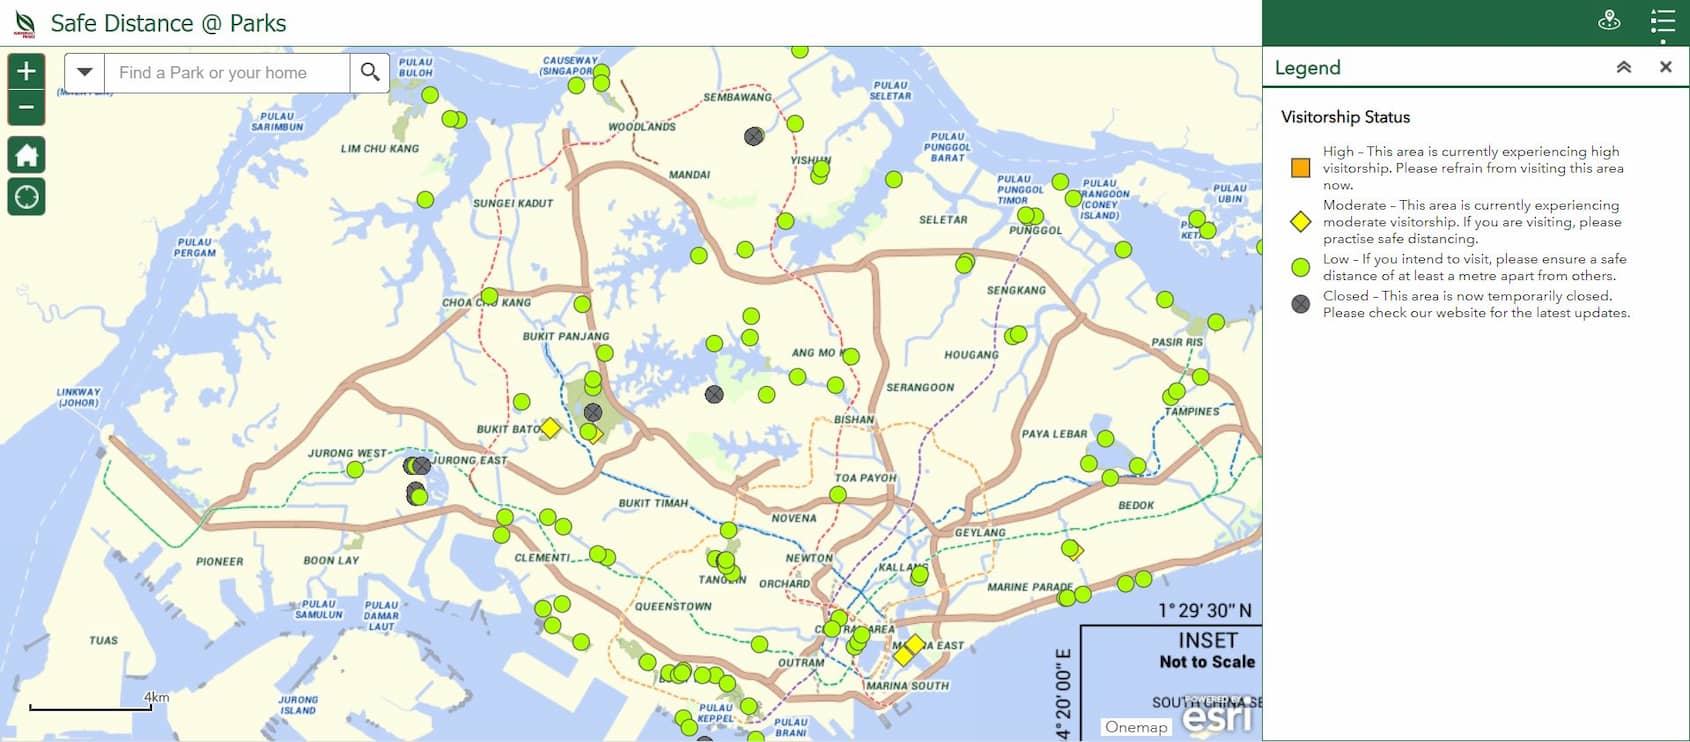 NParks map which shows the crowd status of parks in Singapore online, for people who love to hike